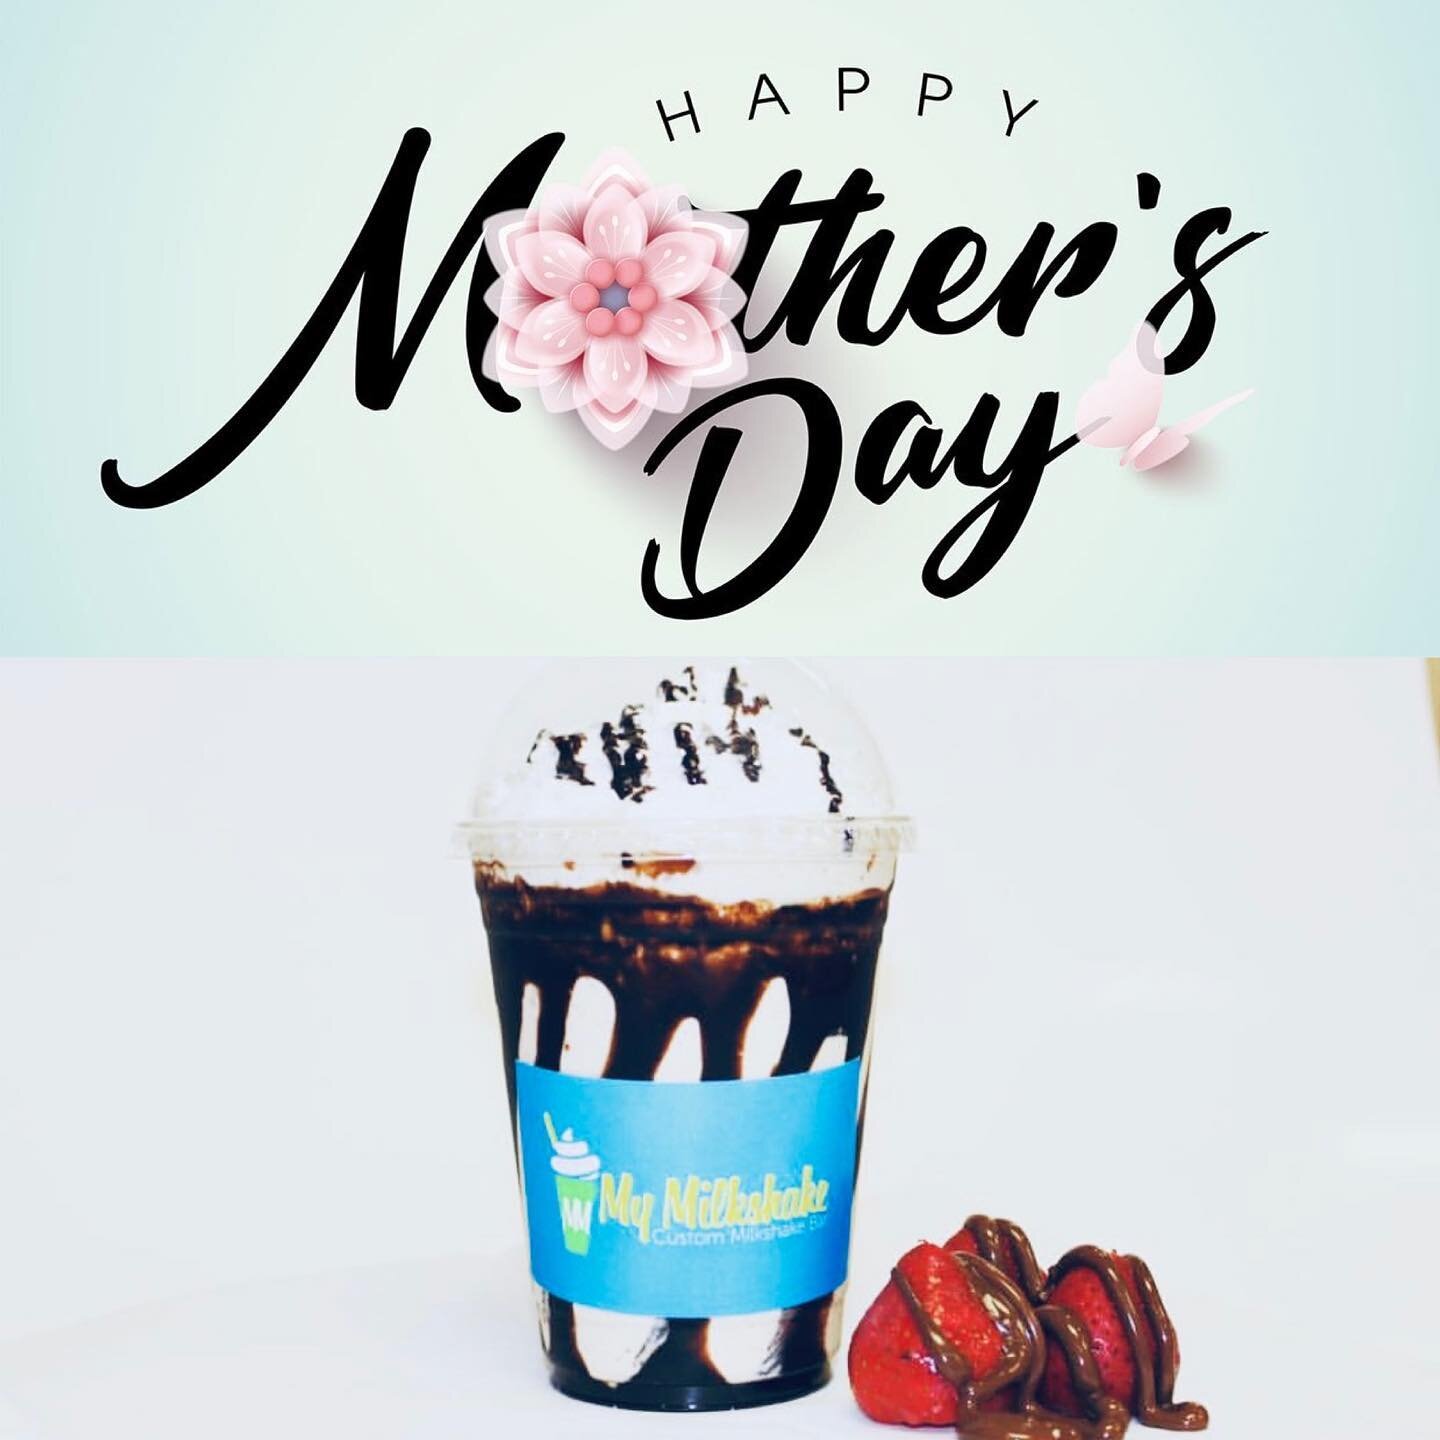 Happy Mothers Day to all the Moms out there! We are open in Downtown from 12pm - 11pm, and we are open in Almaden from 4pm - 9pm today - come by and Treat your MOM today! 😋🍦🍰☕️🍭🍌🍒🍍🍓🍫🍪🍬🍟😋 #MyMilkshakeSJ #Milkshake #Dessert #NomNomNom #151